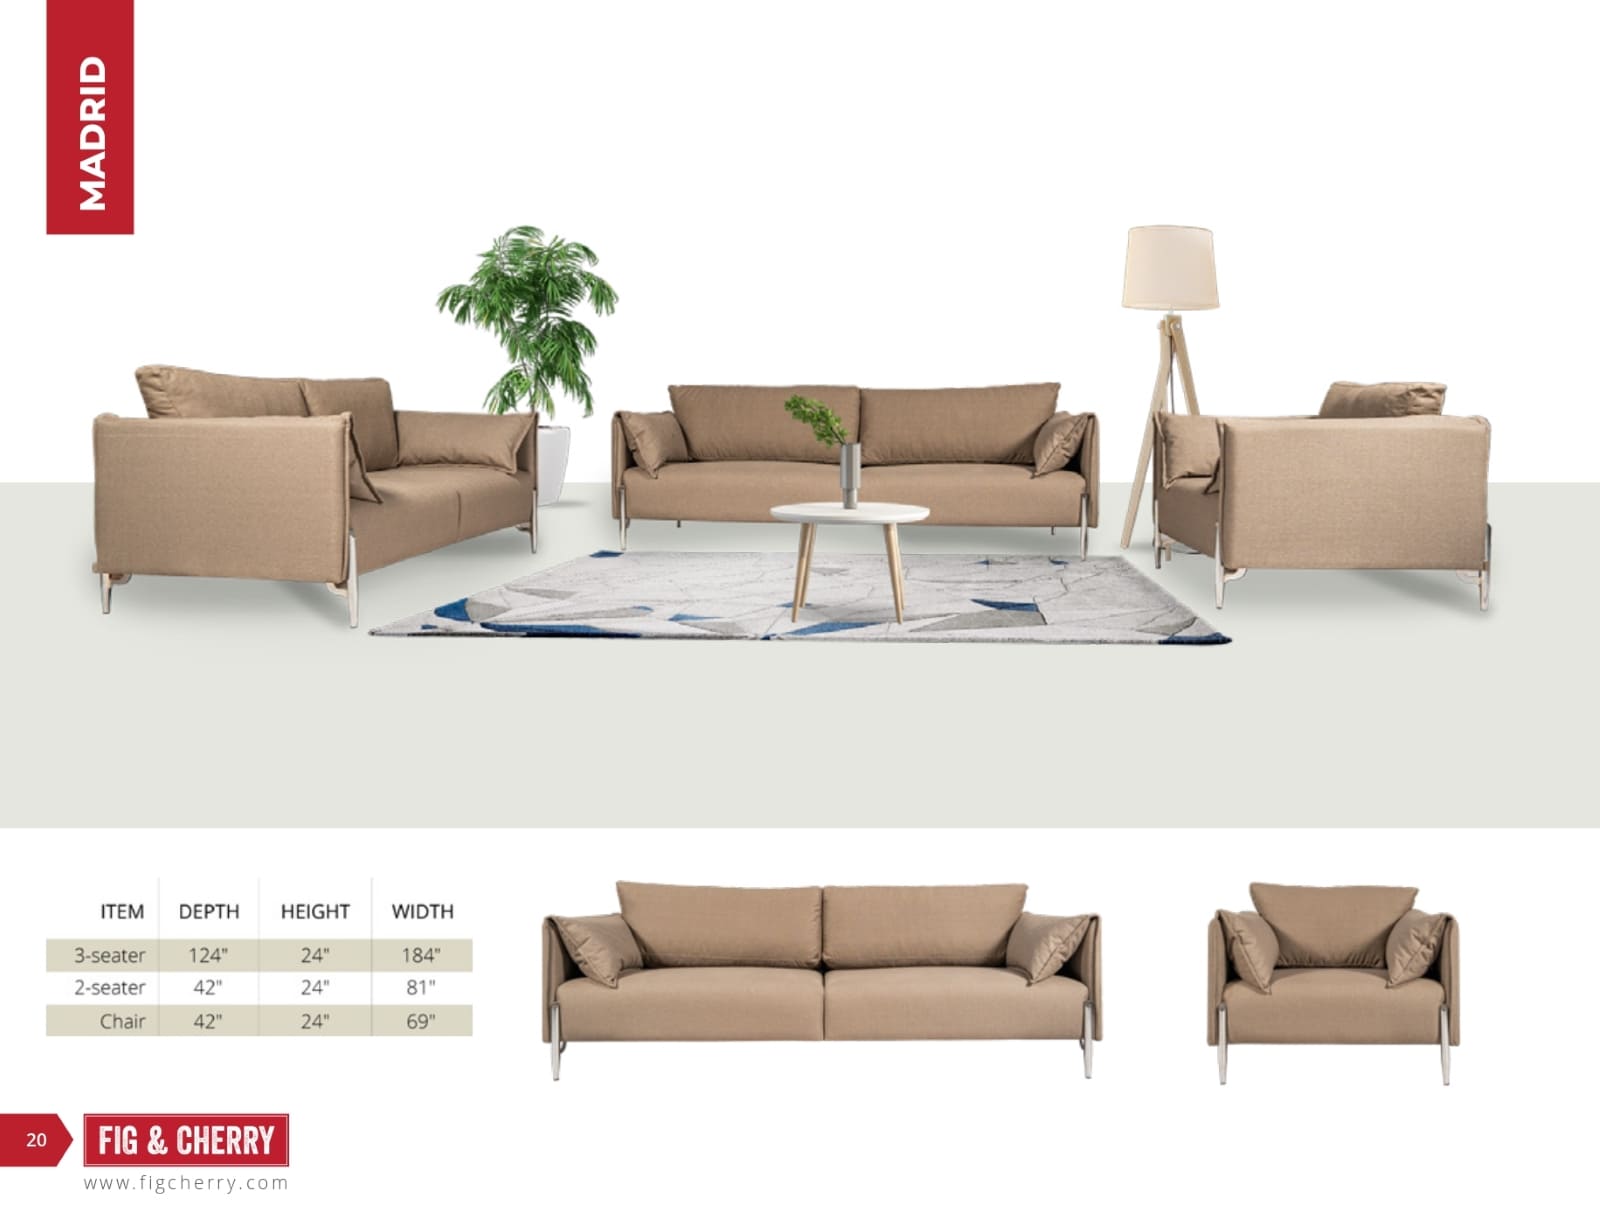 Fig & Cherry Indoor Collection (Sofas and Sectionals) Catalog (20)